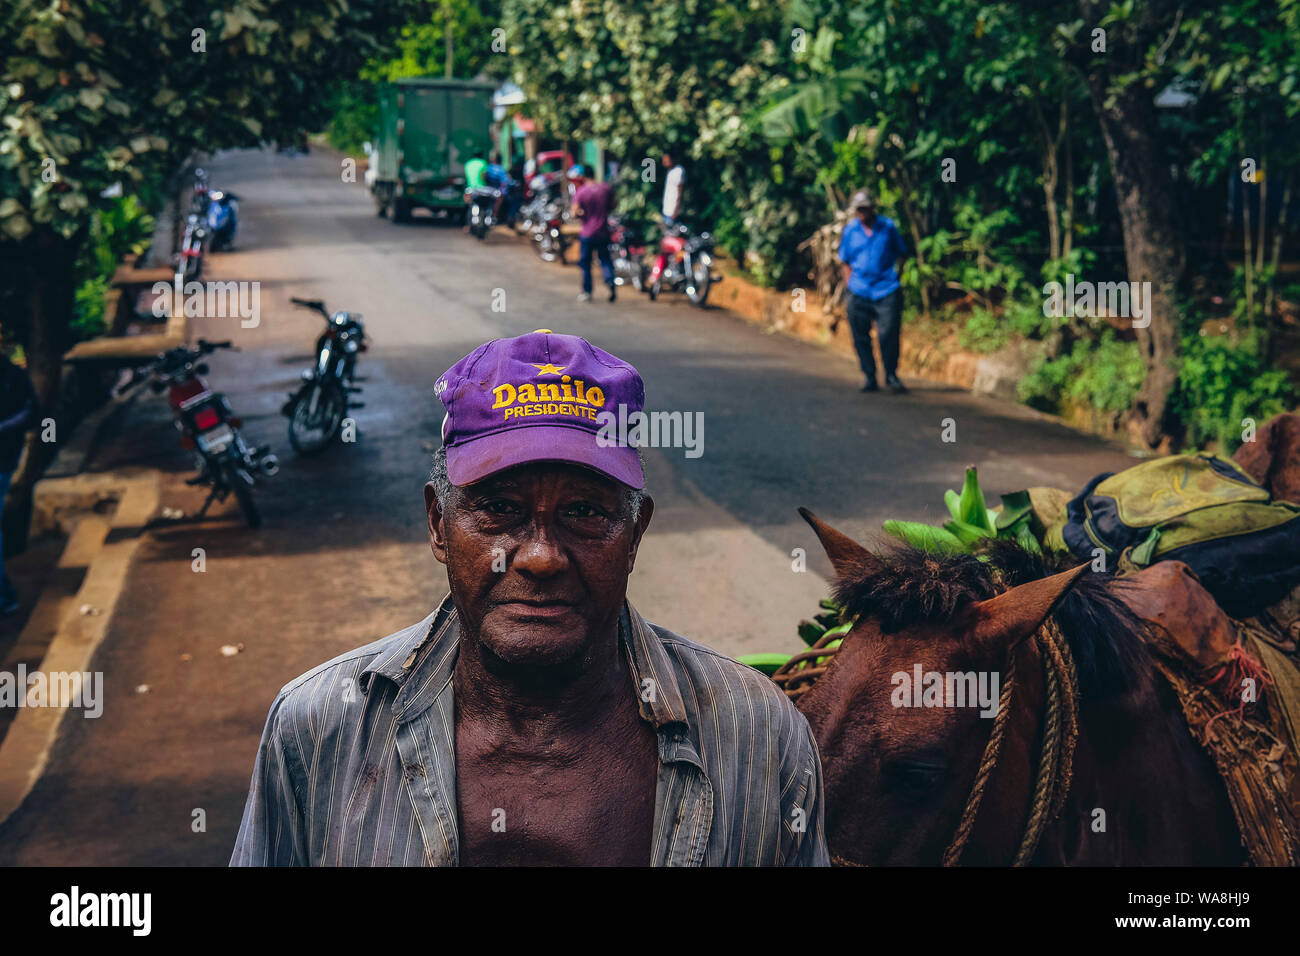 Old man from the countryside is seen in a village street wearing a cap that states 'Danilo Presidente' near a loaded donkey Stock Photo